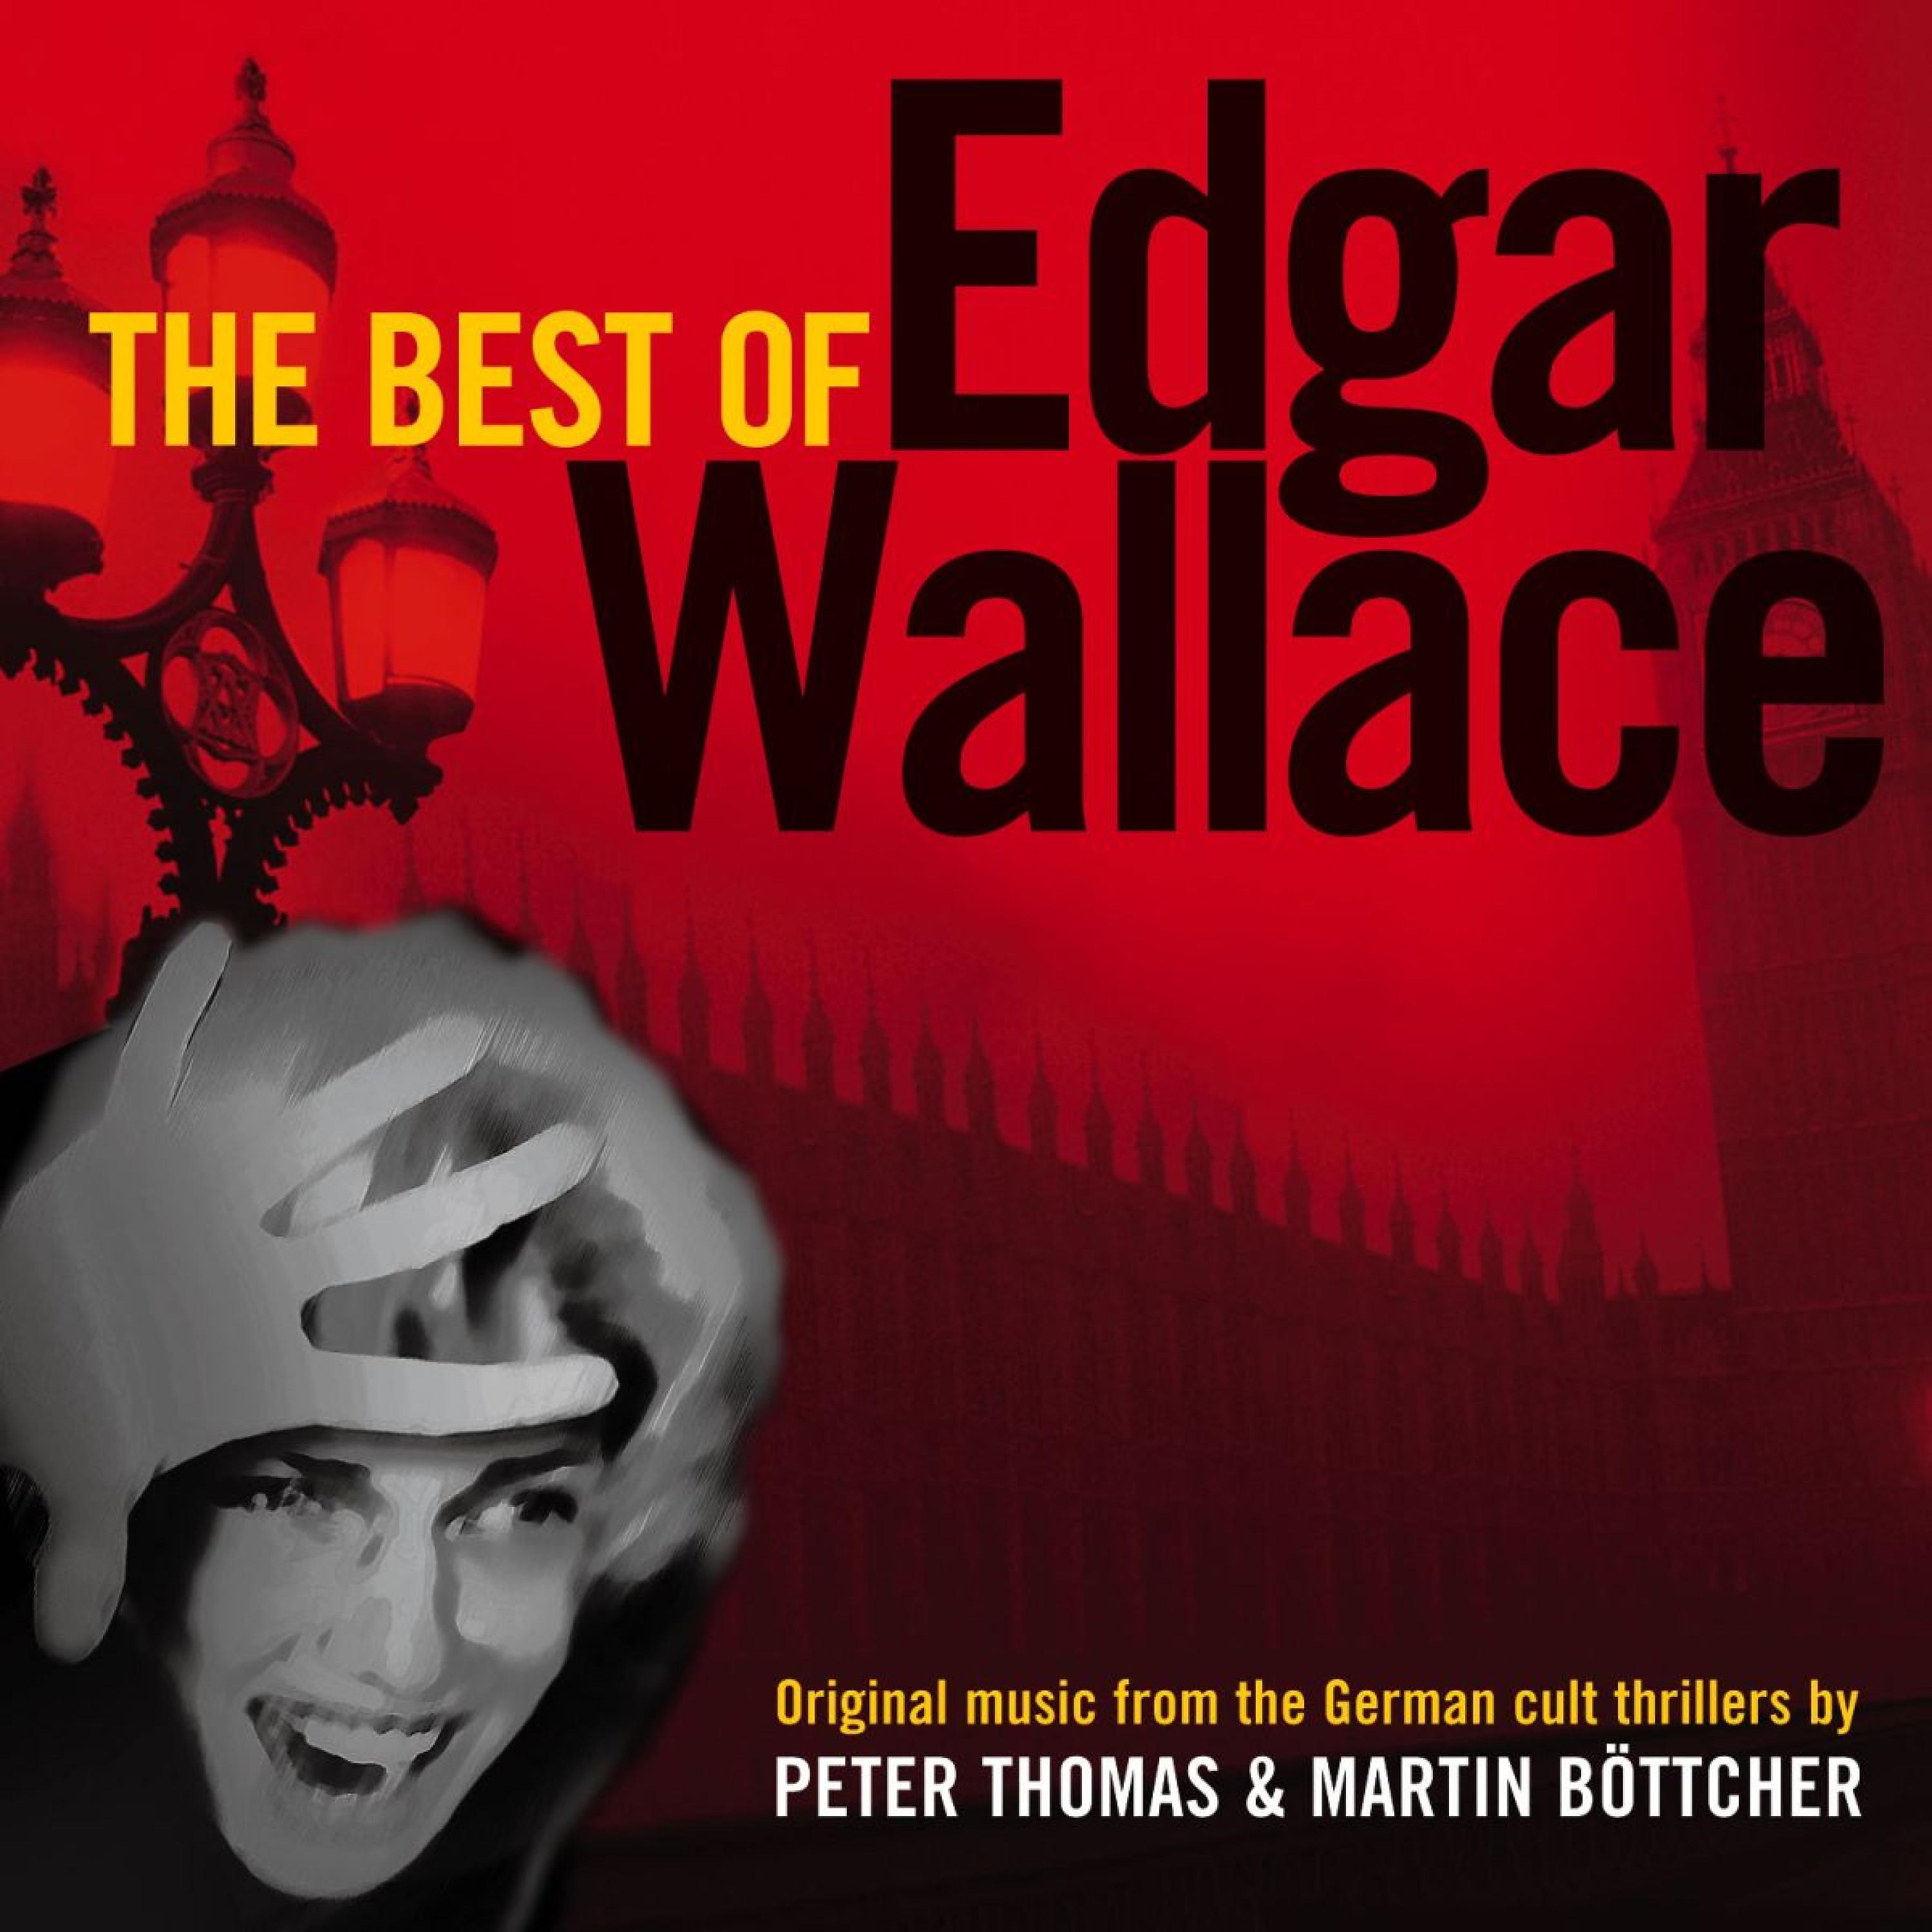 Постер альбома The Best of Edgar Wallace